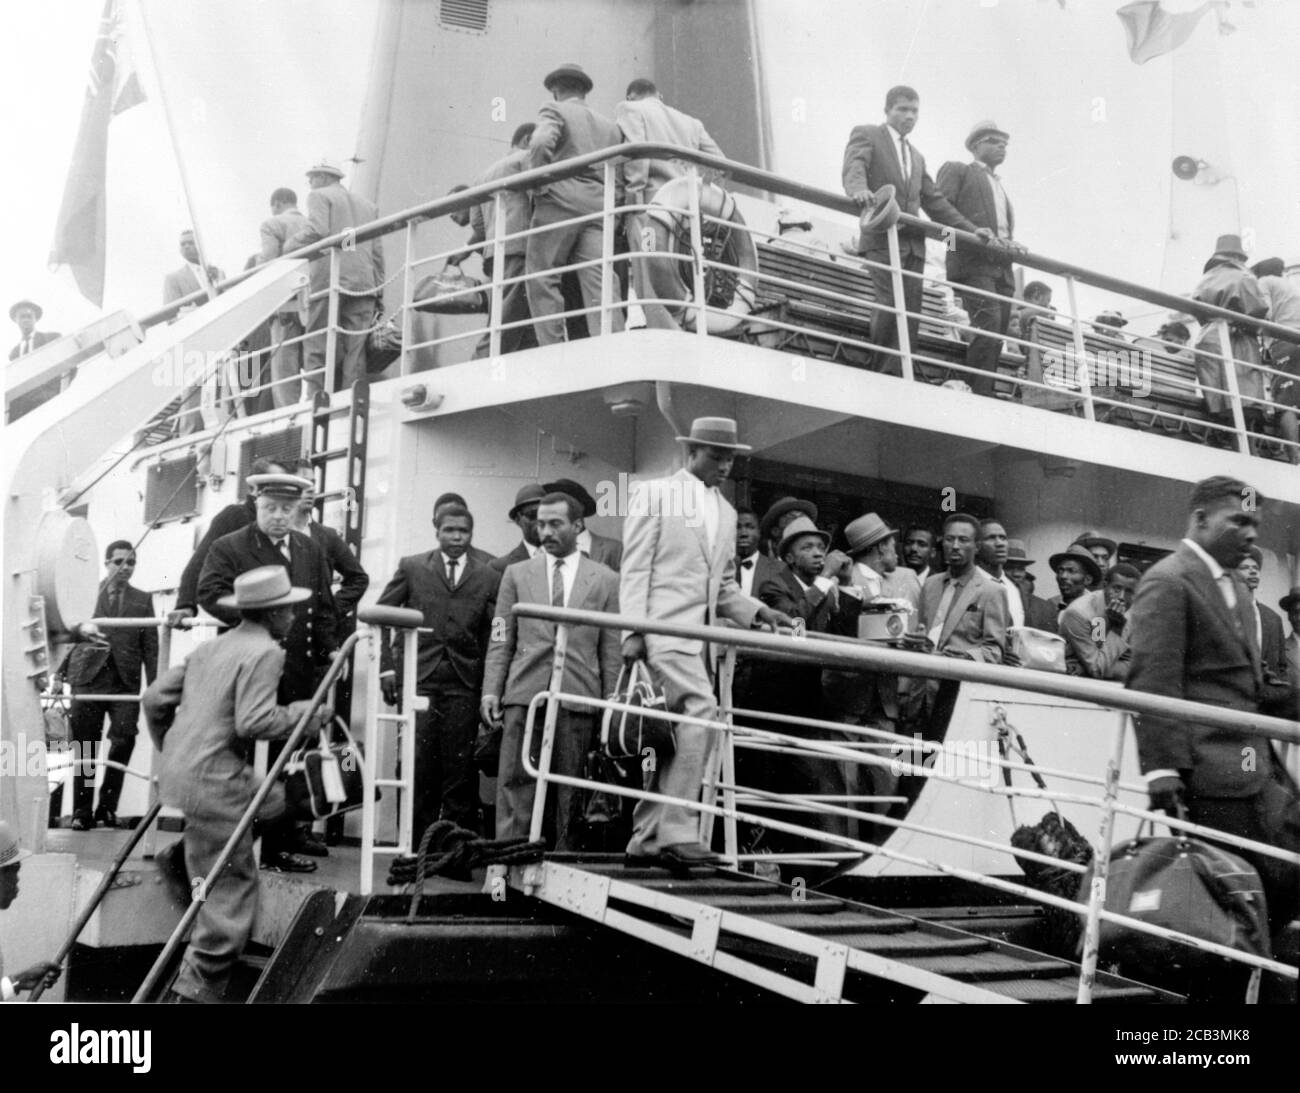 Men, women and children from the Caribbean arrive at Southampton in 1962 at the invitation of the British Government to help with rebuilding Britain after World War II. These people became the Windrush Generation due to their treatment by the British Home Office under a hostile environment policy where employers and other organisations were required to ask for visas. Stock Photo